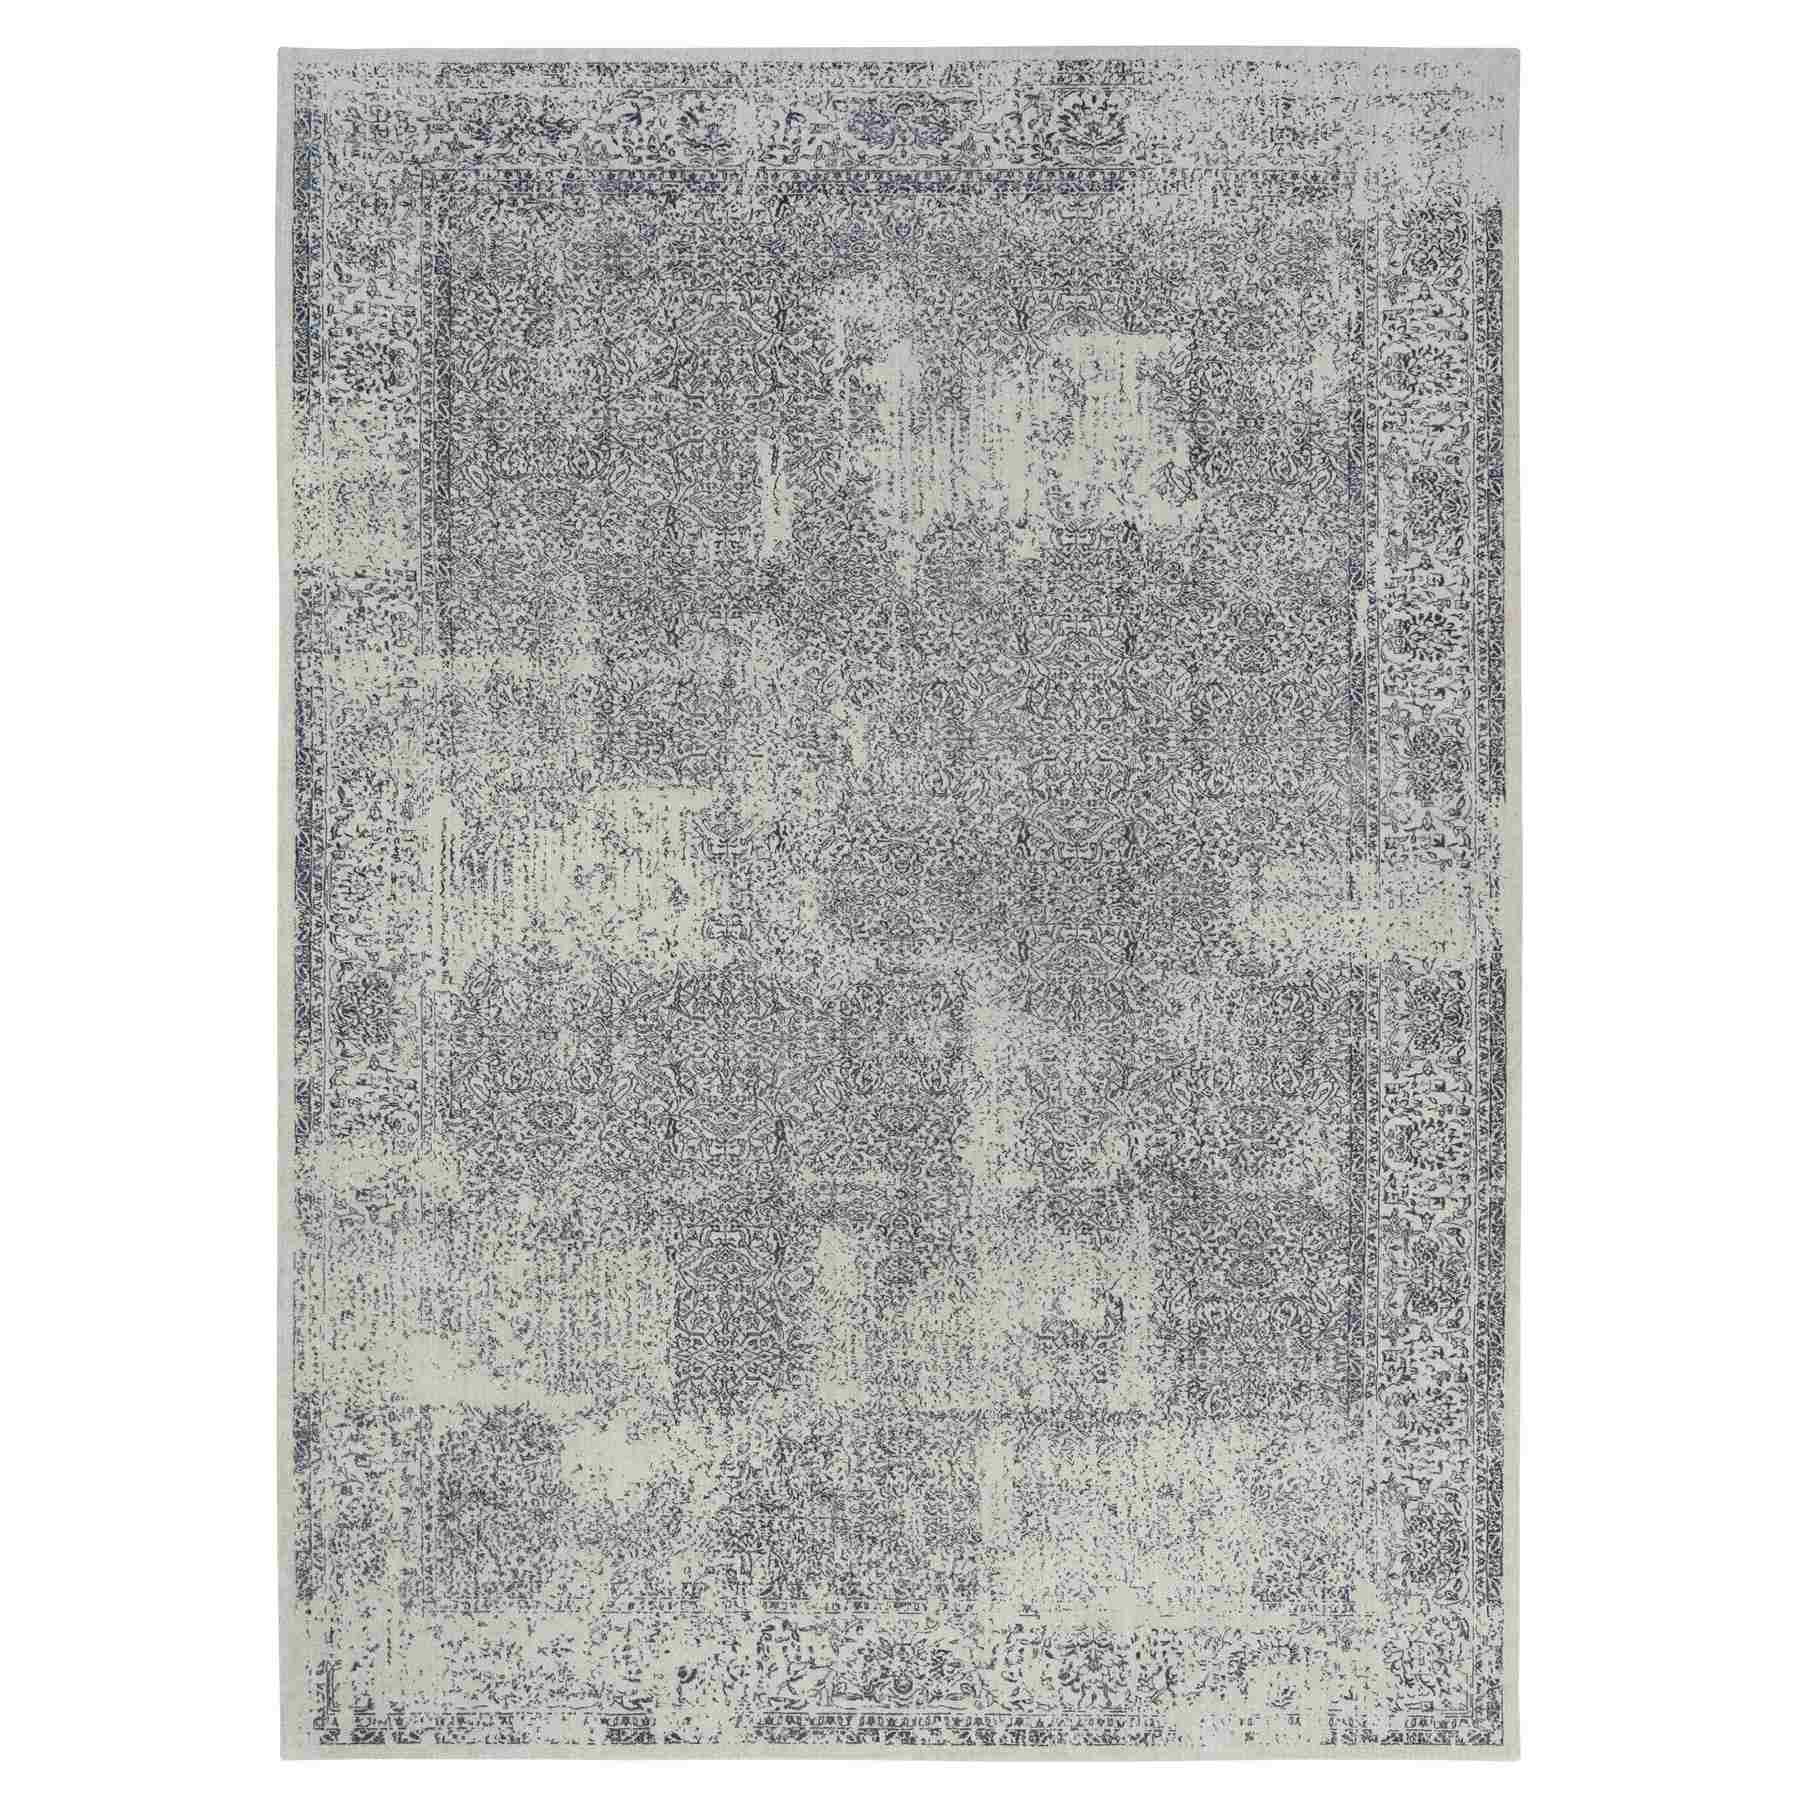 Modern-and-Contemporary-Hand-Loomed-Rug-316525